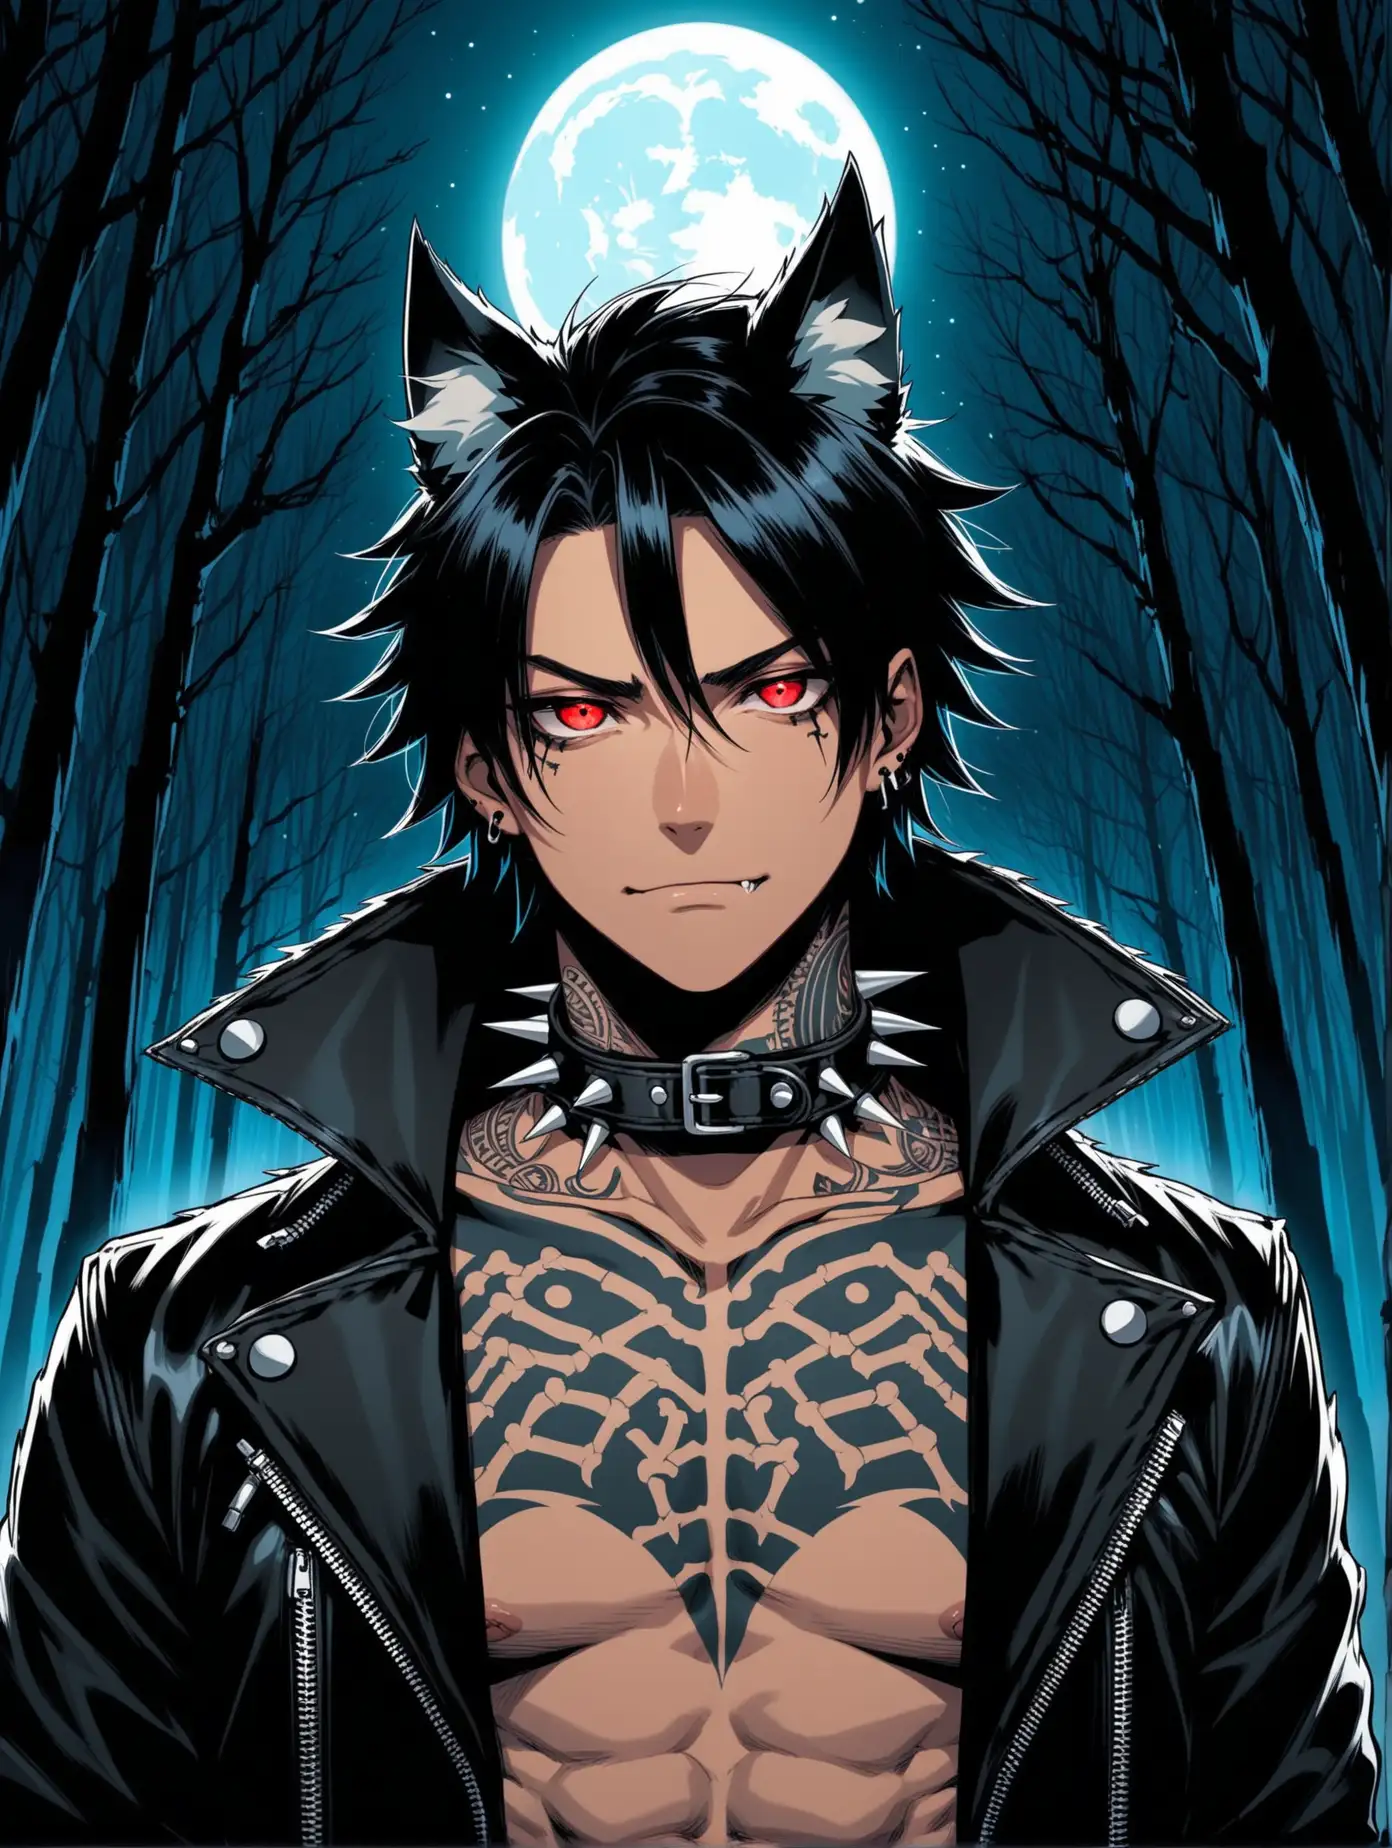 Mysterious-Man-with-Piercings-and-Wolf-Features-in-Night-Cemetery